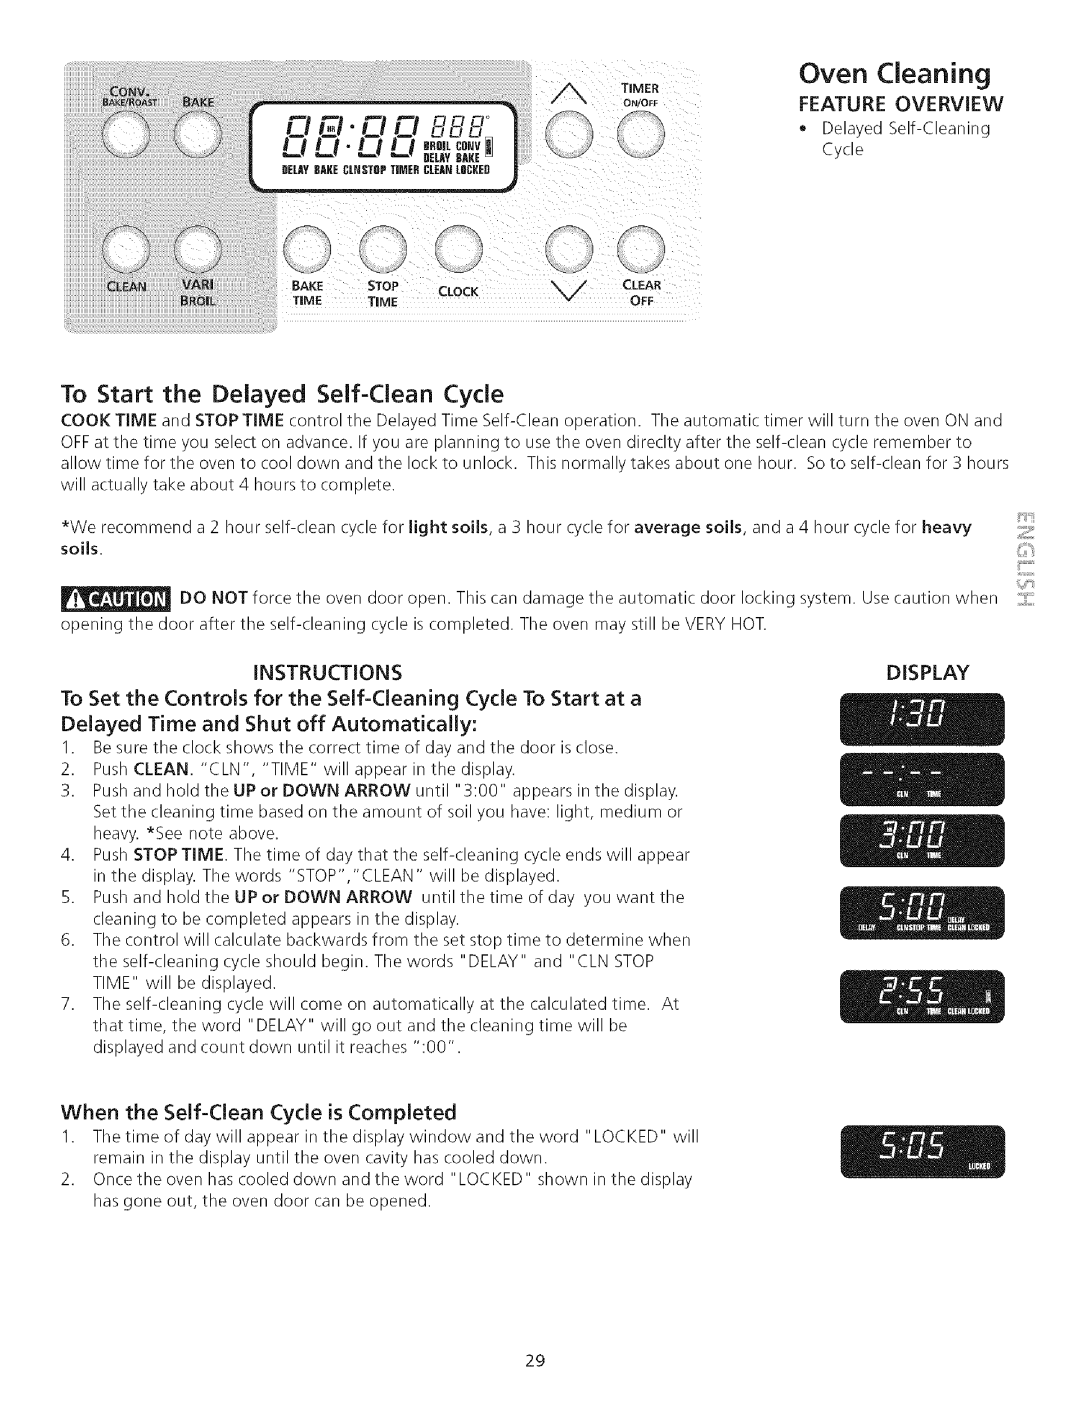 Kenmore 790.75503 manual Oven Cleaning, To Start the Delayed Self-CleanCycle, Feature Overview, Display 